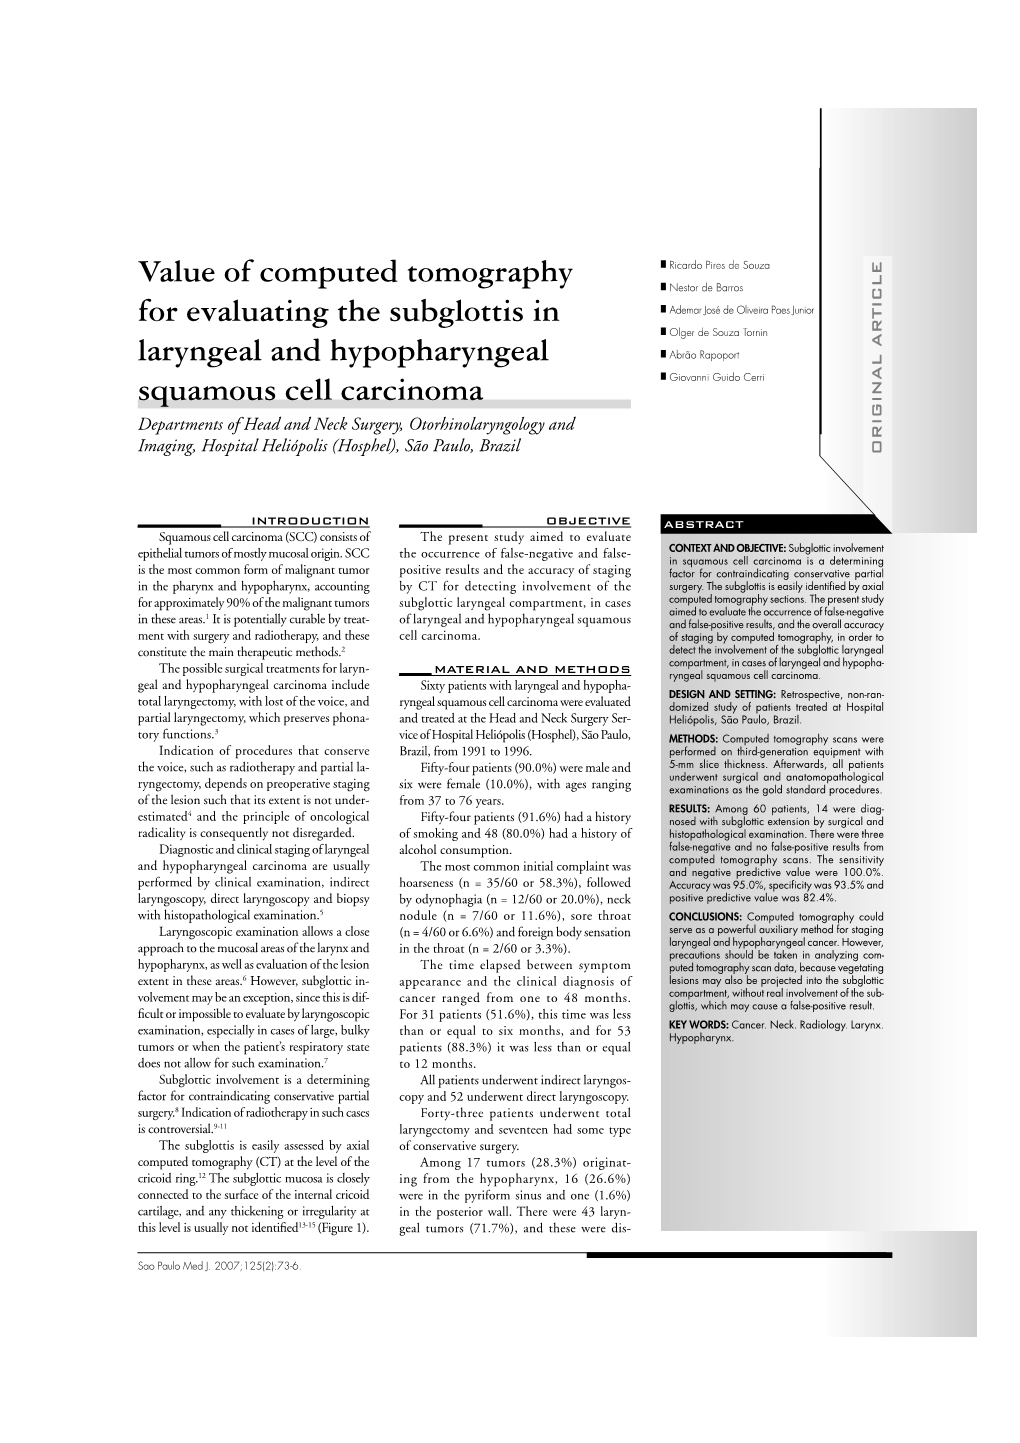 Value of Computed Tomography for Evaluating the Subglottis In